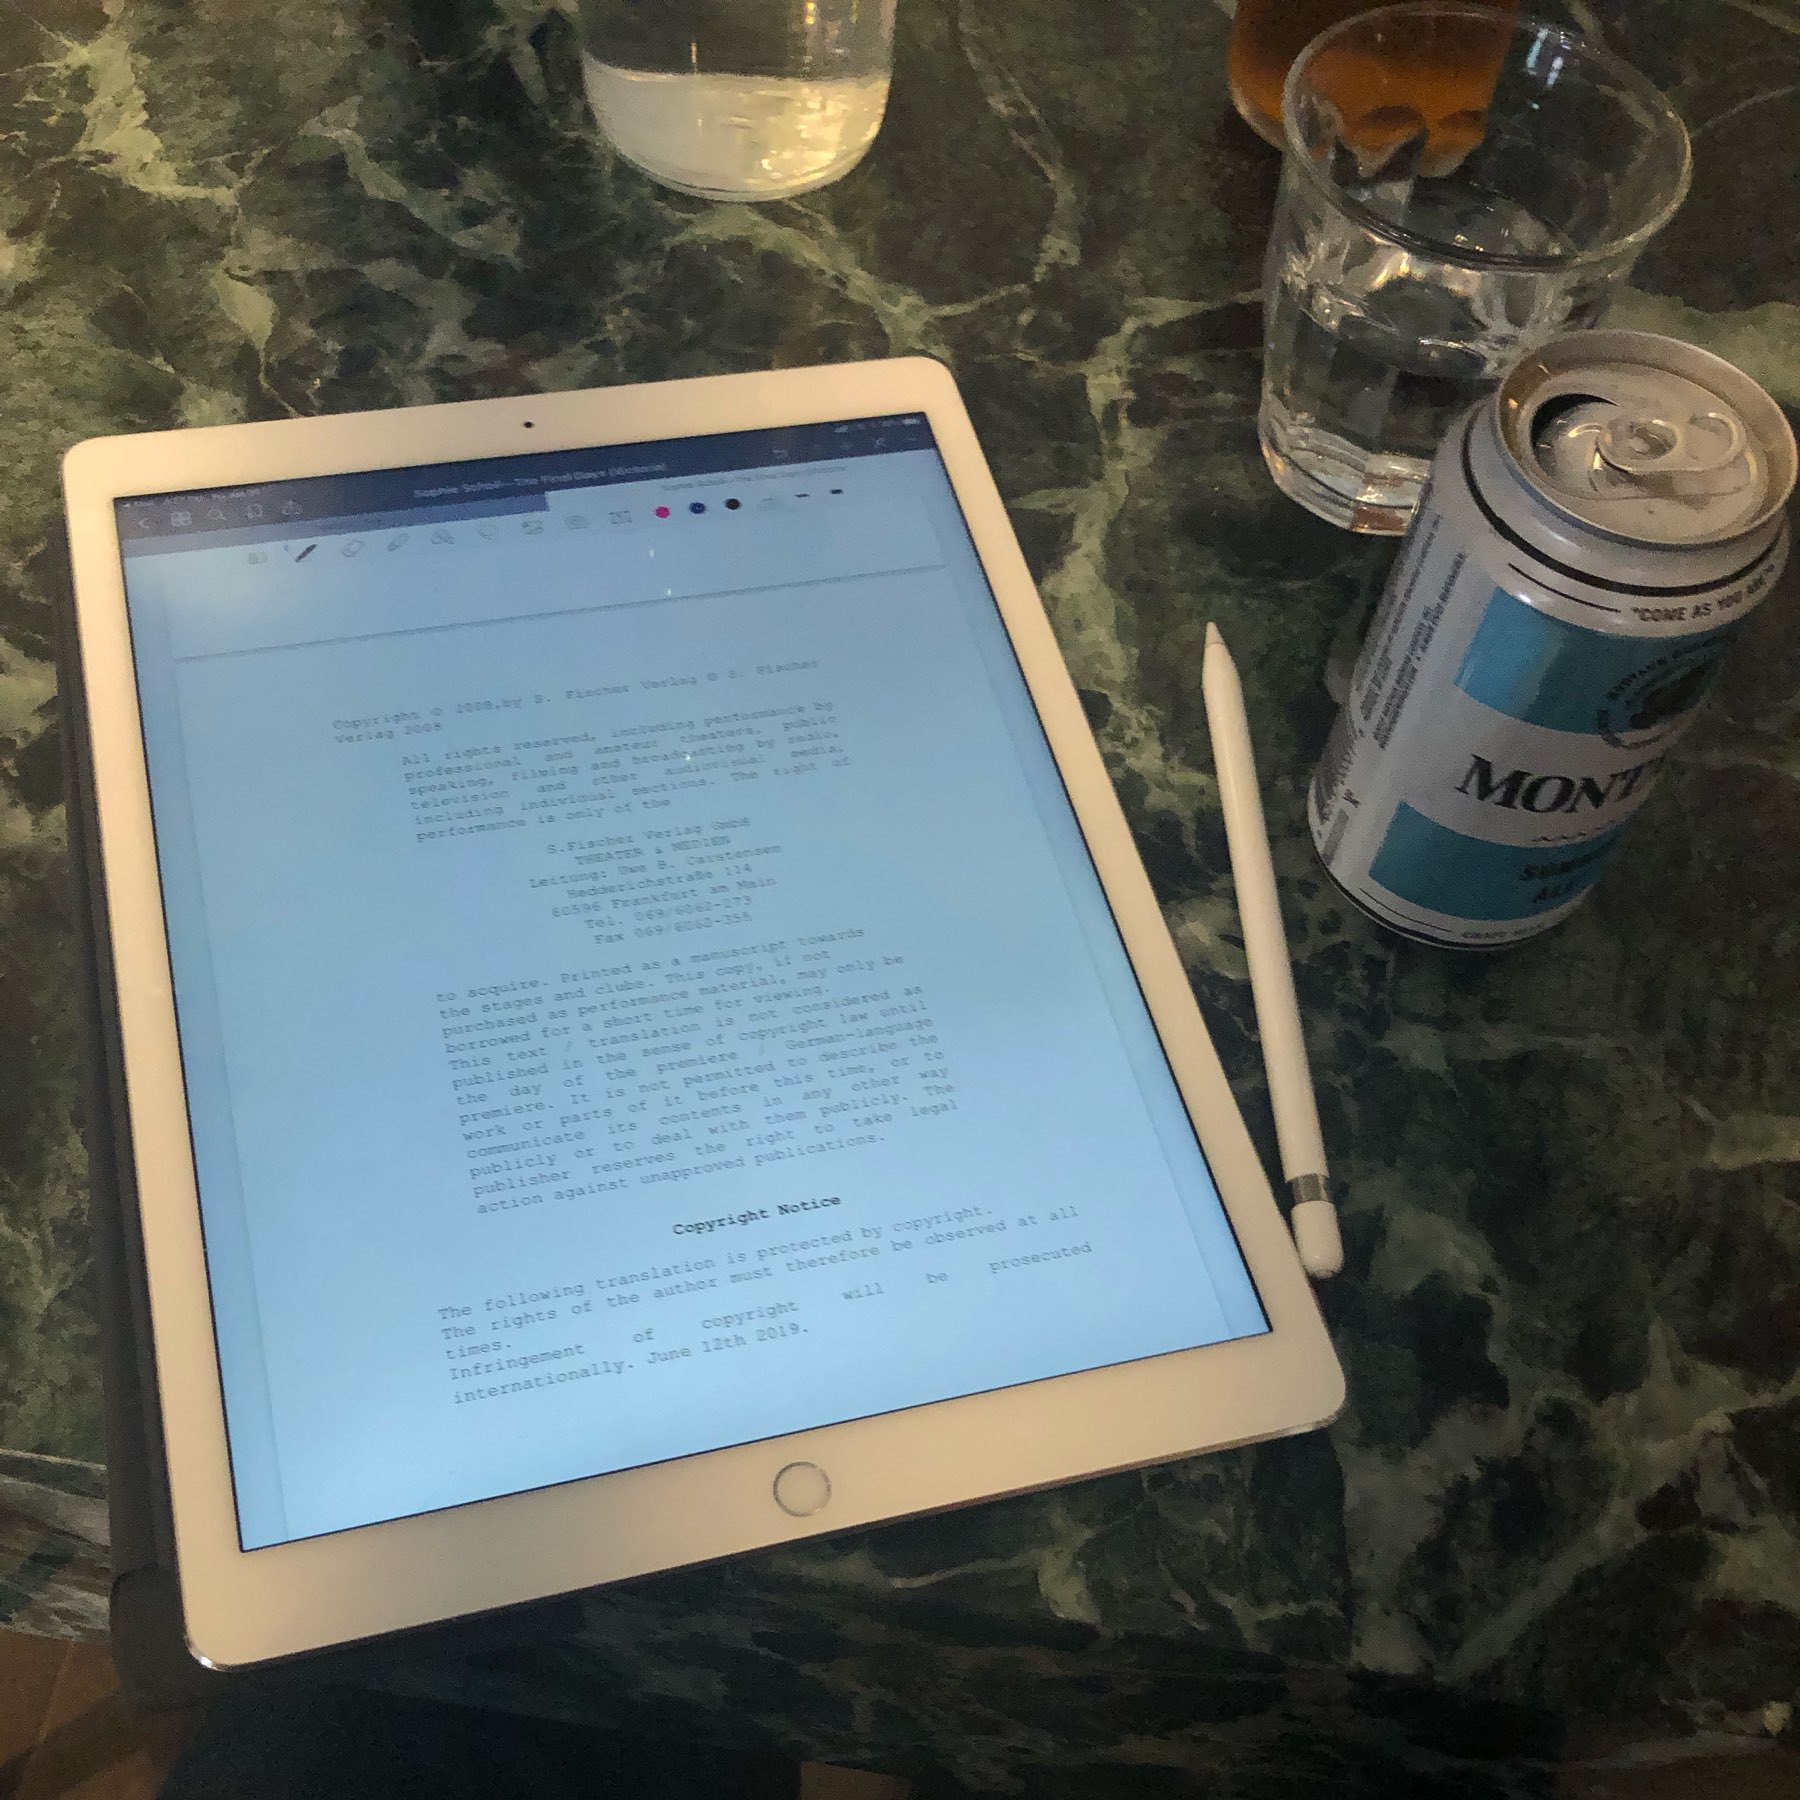 iPad with play script next to beer can